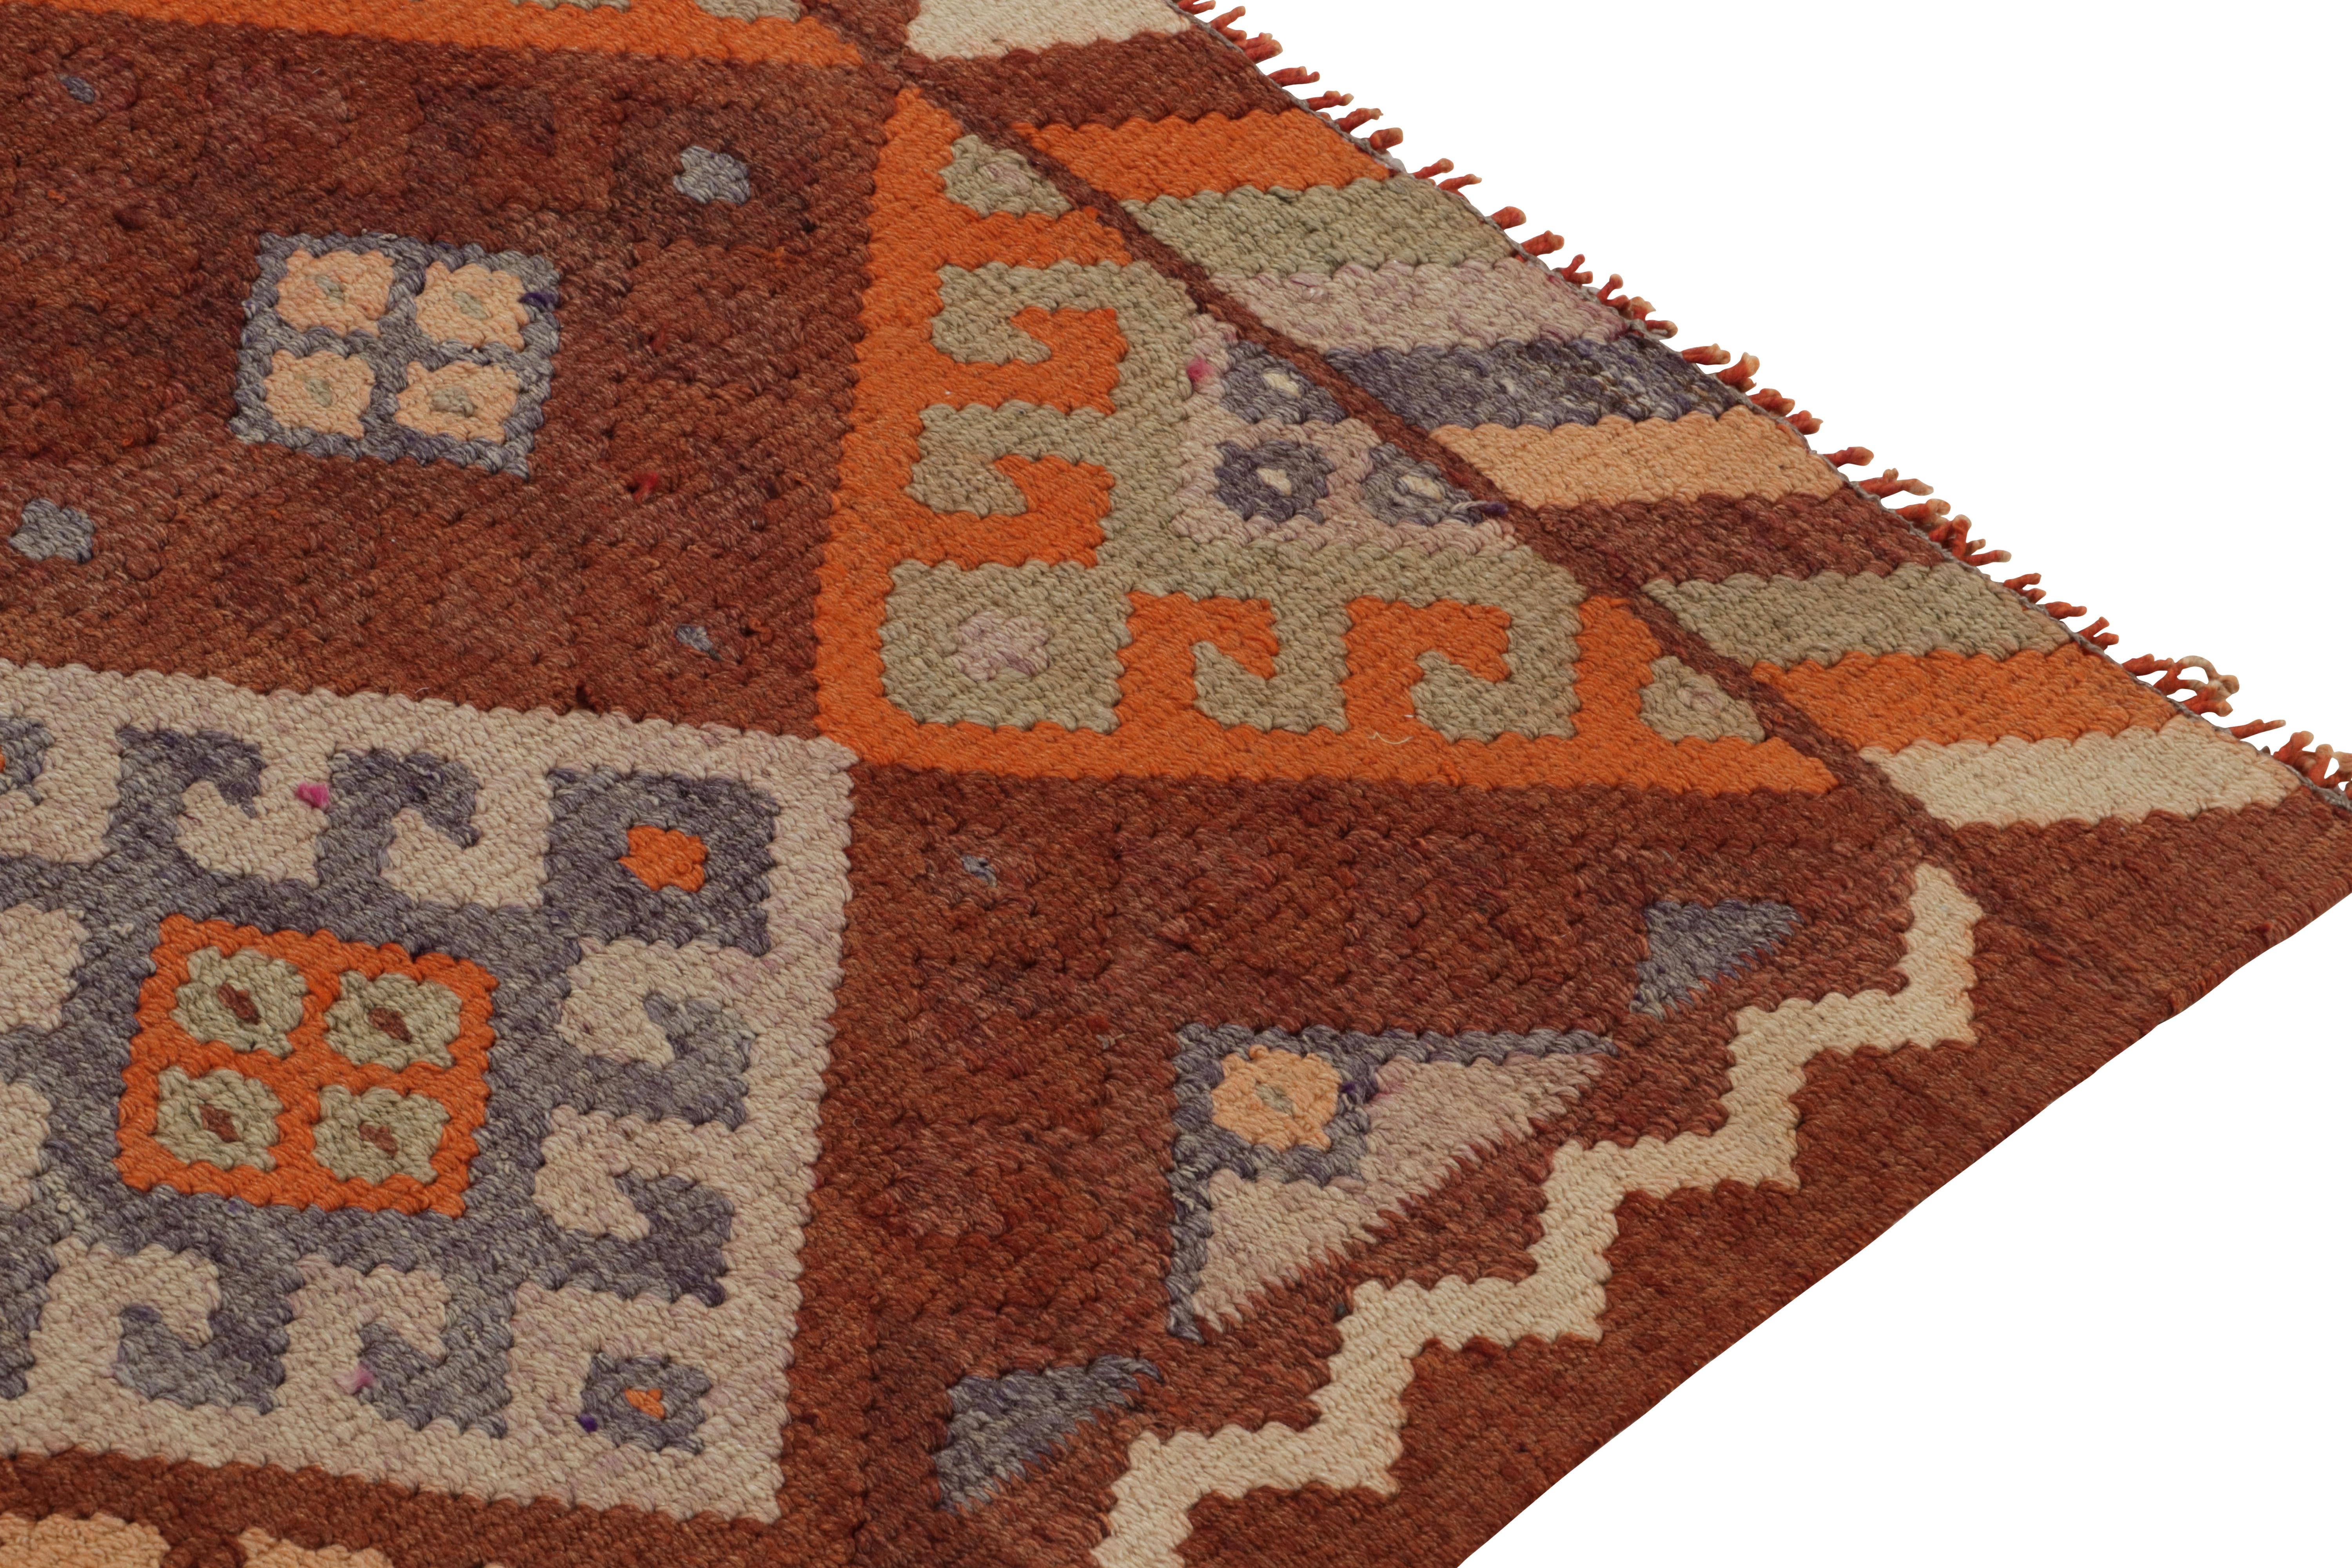 Vintage Tribal Kilim Runner in Rust Brown Geometric Pattern by Rug & Kilim In Good Condition For Sale In Long Island City, NY